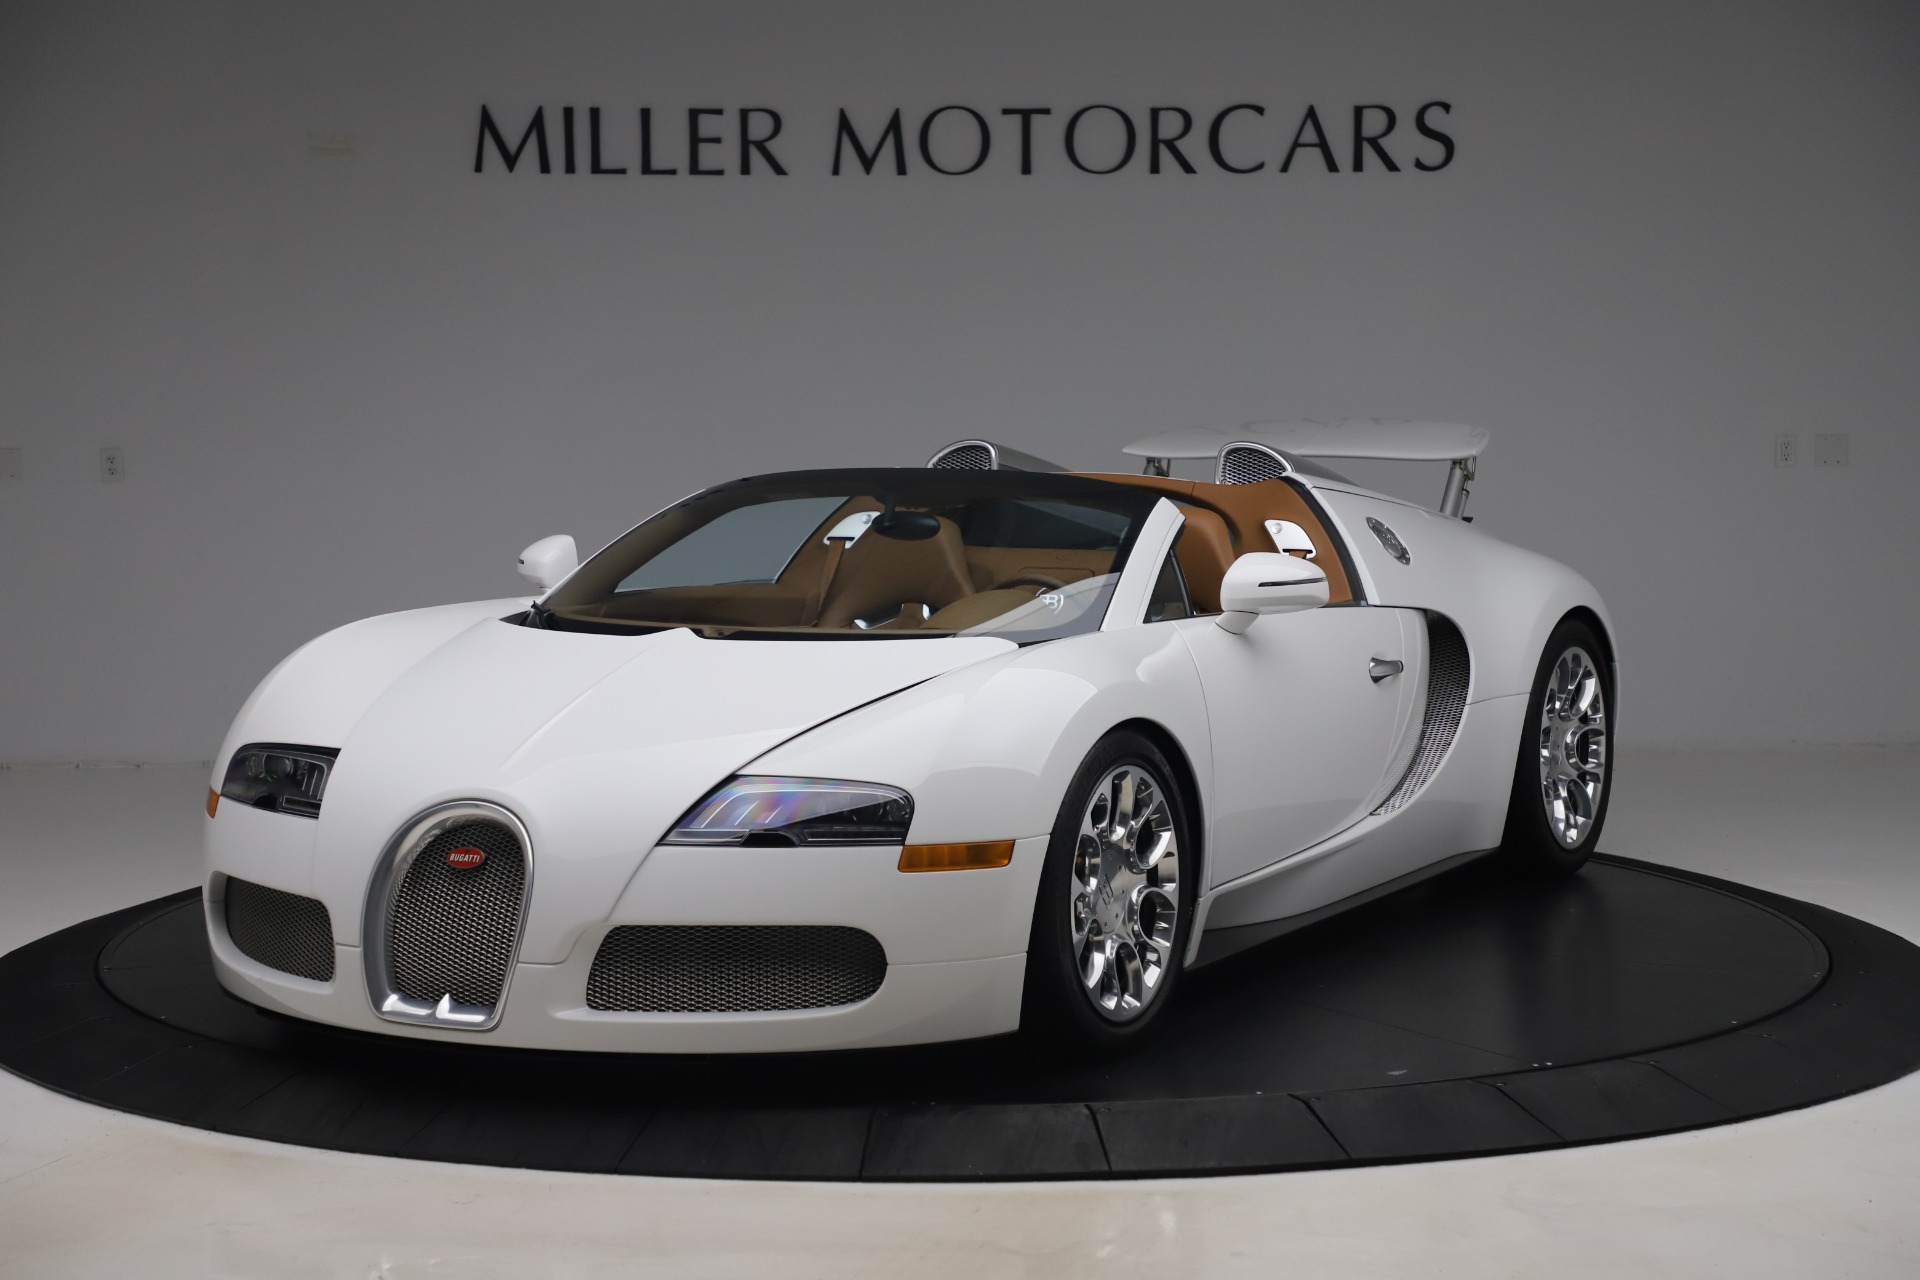 Used 2011 Bugatti Veyron 16.4 Grand Sport for sale Call for price at Alfa Romeo of Westport in Westport CT 06880 1